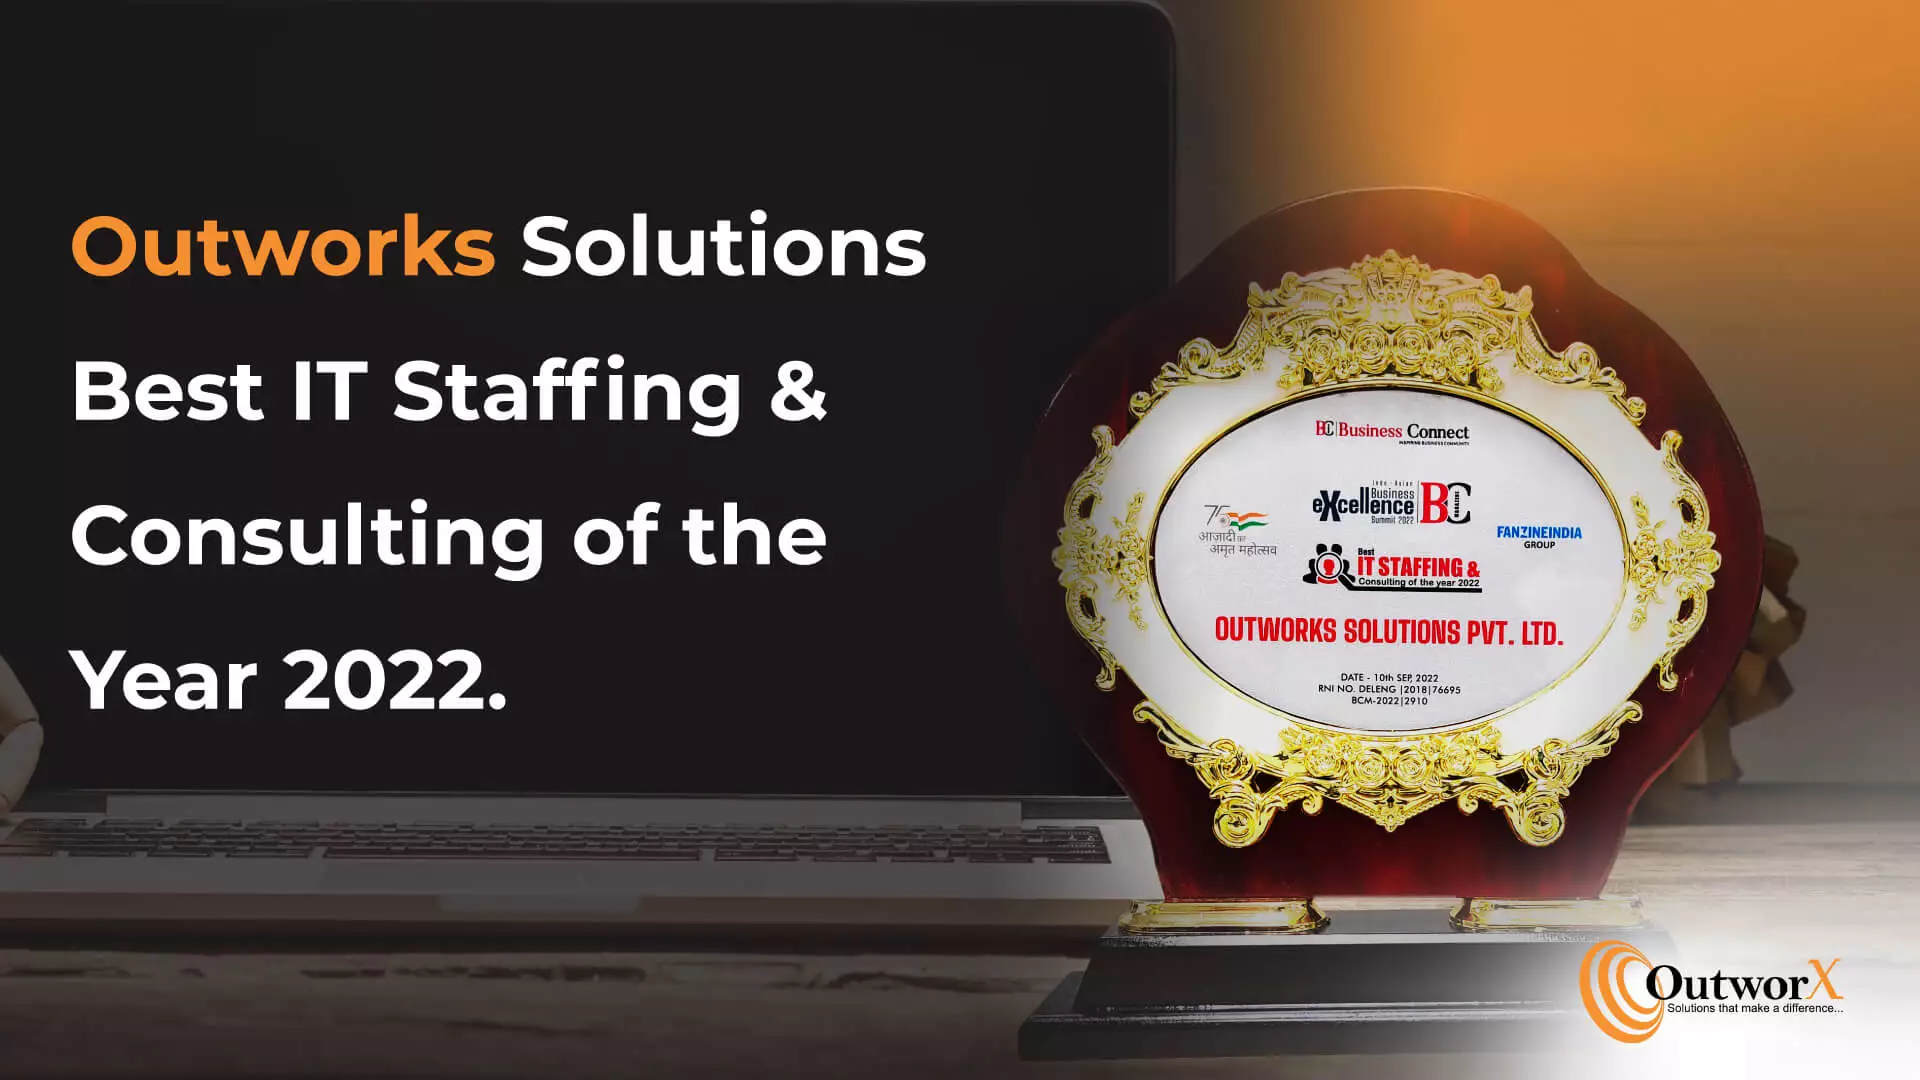 best it staffing and consulting of the year 2022, outworks solutions, staff augmentation in india, application staffing, managed it services in india, it service provider in india